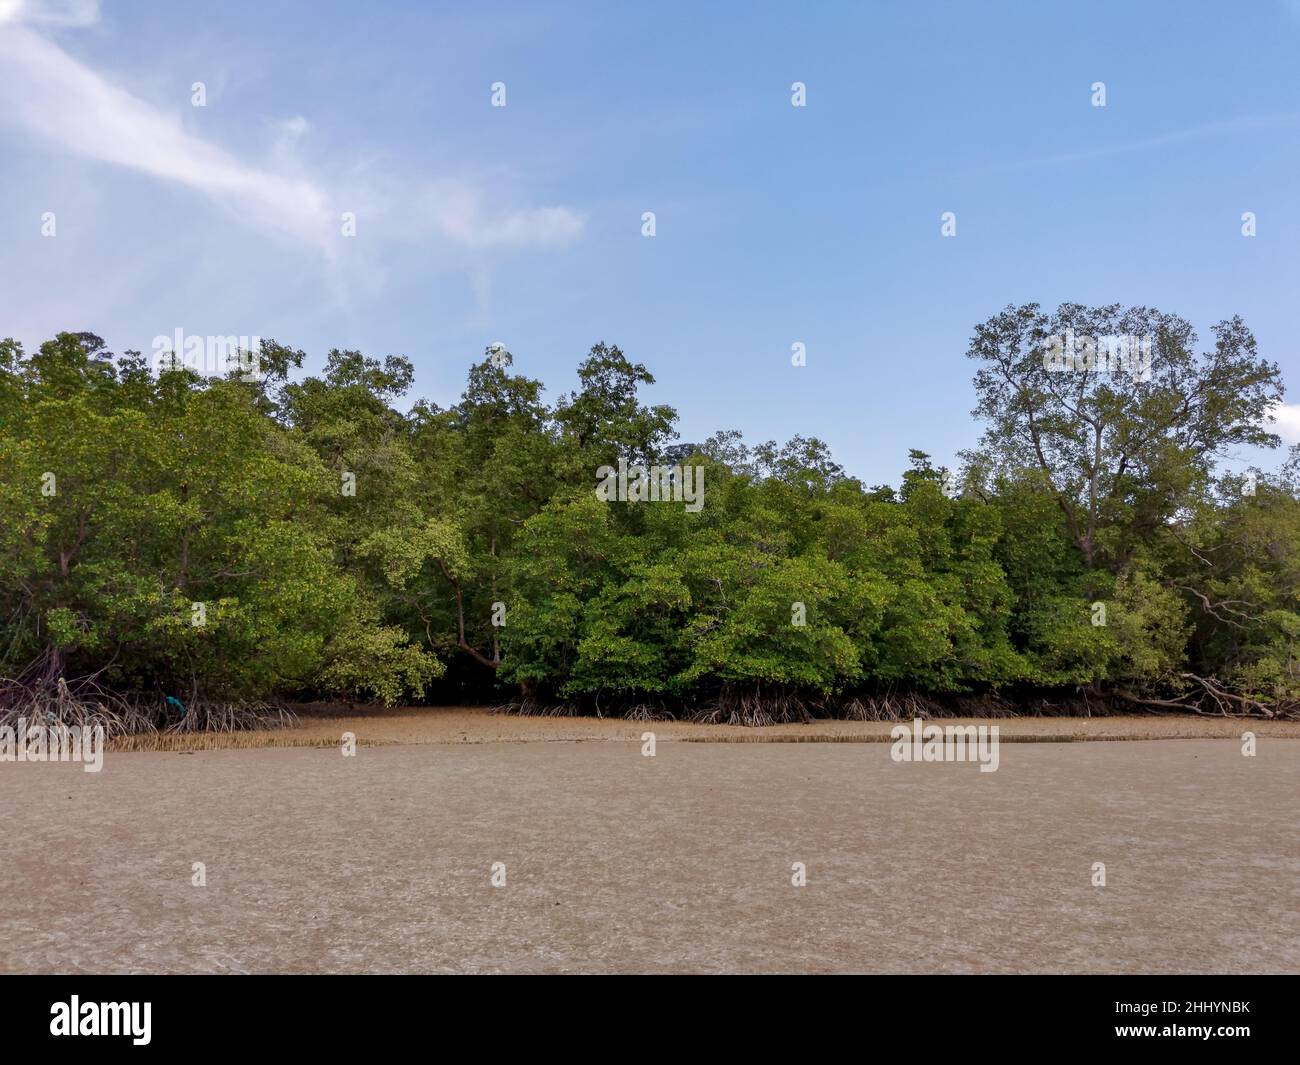 Tropical mangrove forest trees, roots, pneumatophores and aerial roots, view from the sandy beach at a low tide period, Endau, Malaysia. Nature landsc Stock Photo